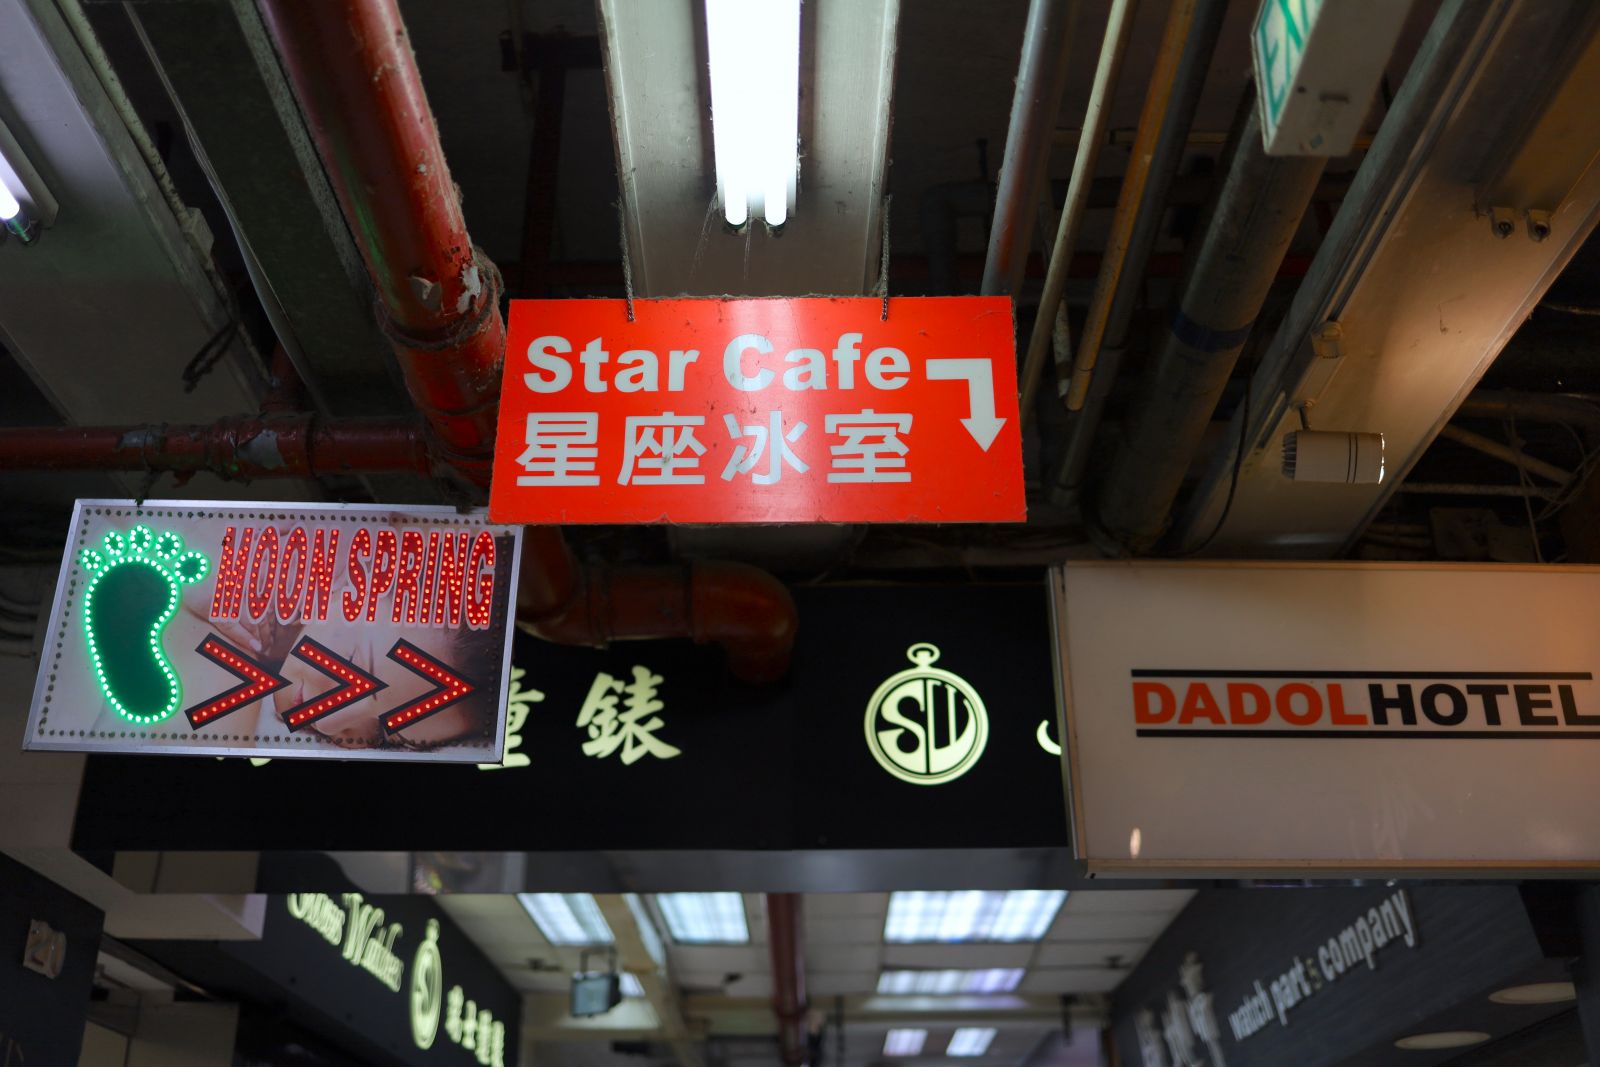 Star Cafe is downstairs from where you walk in 